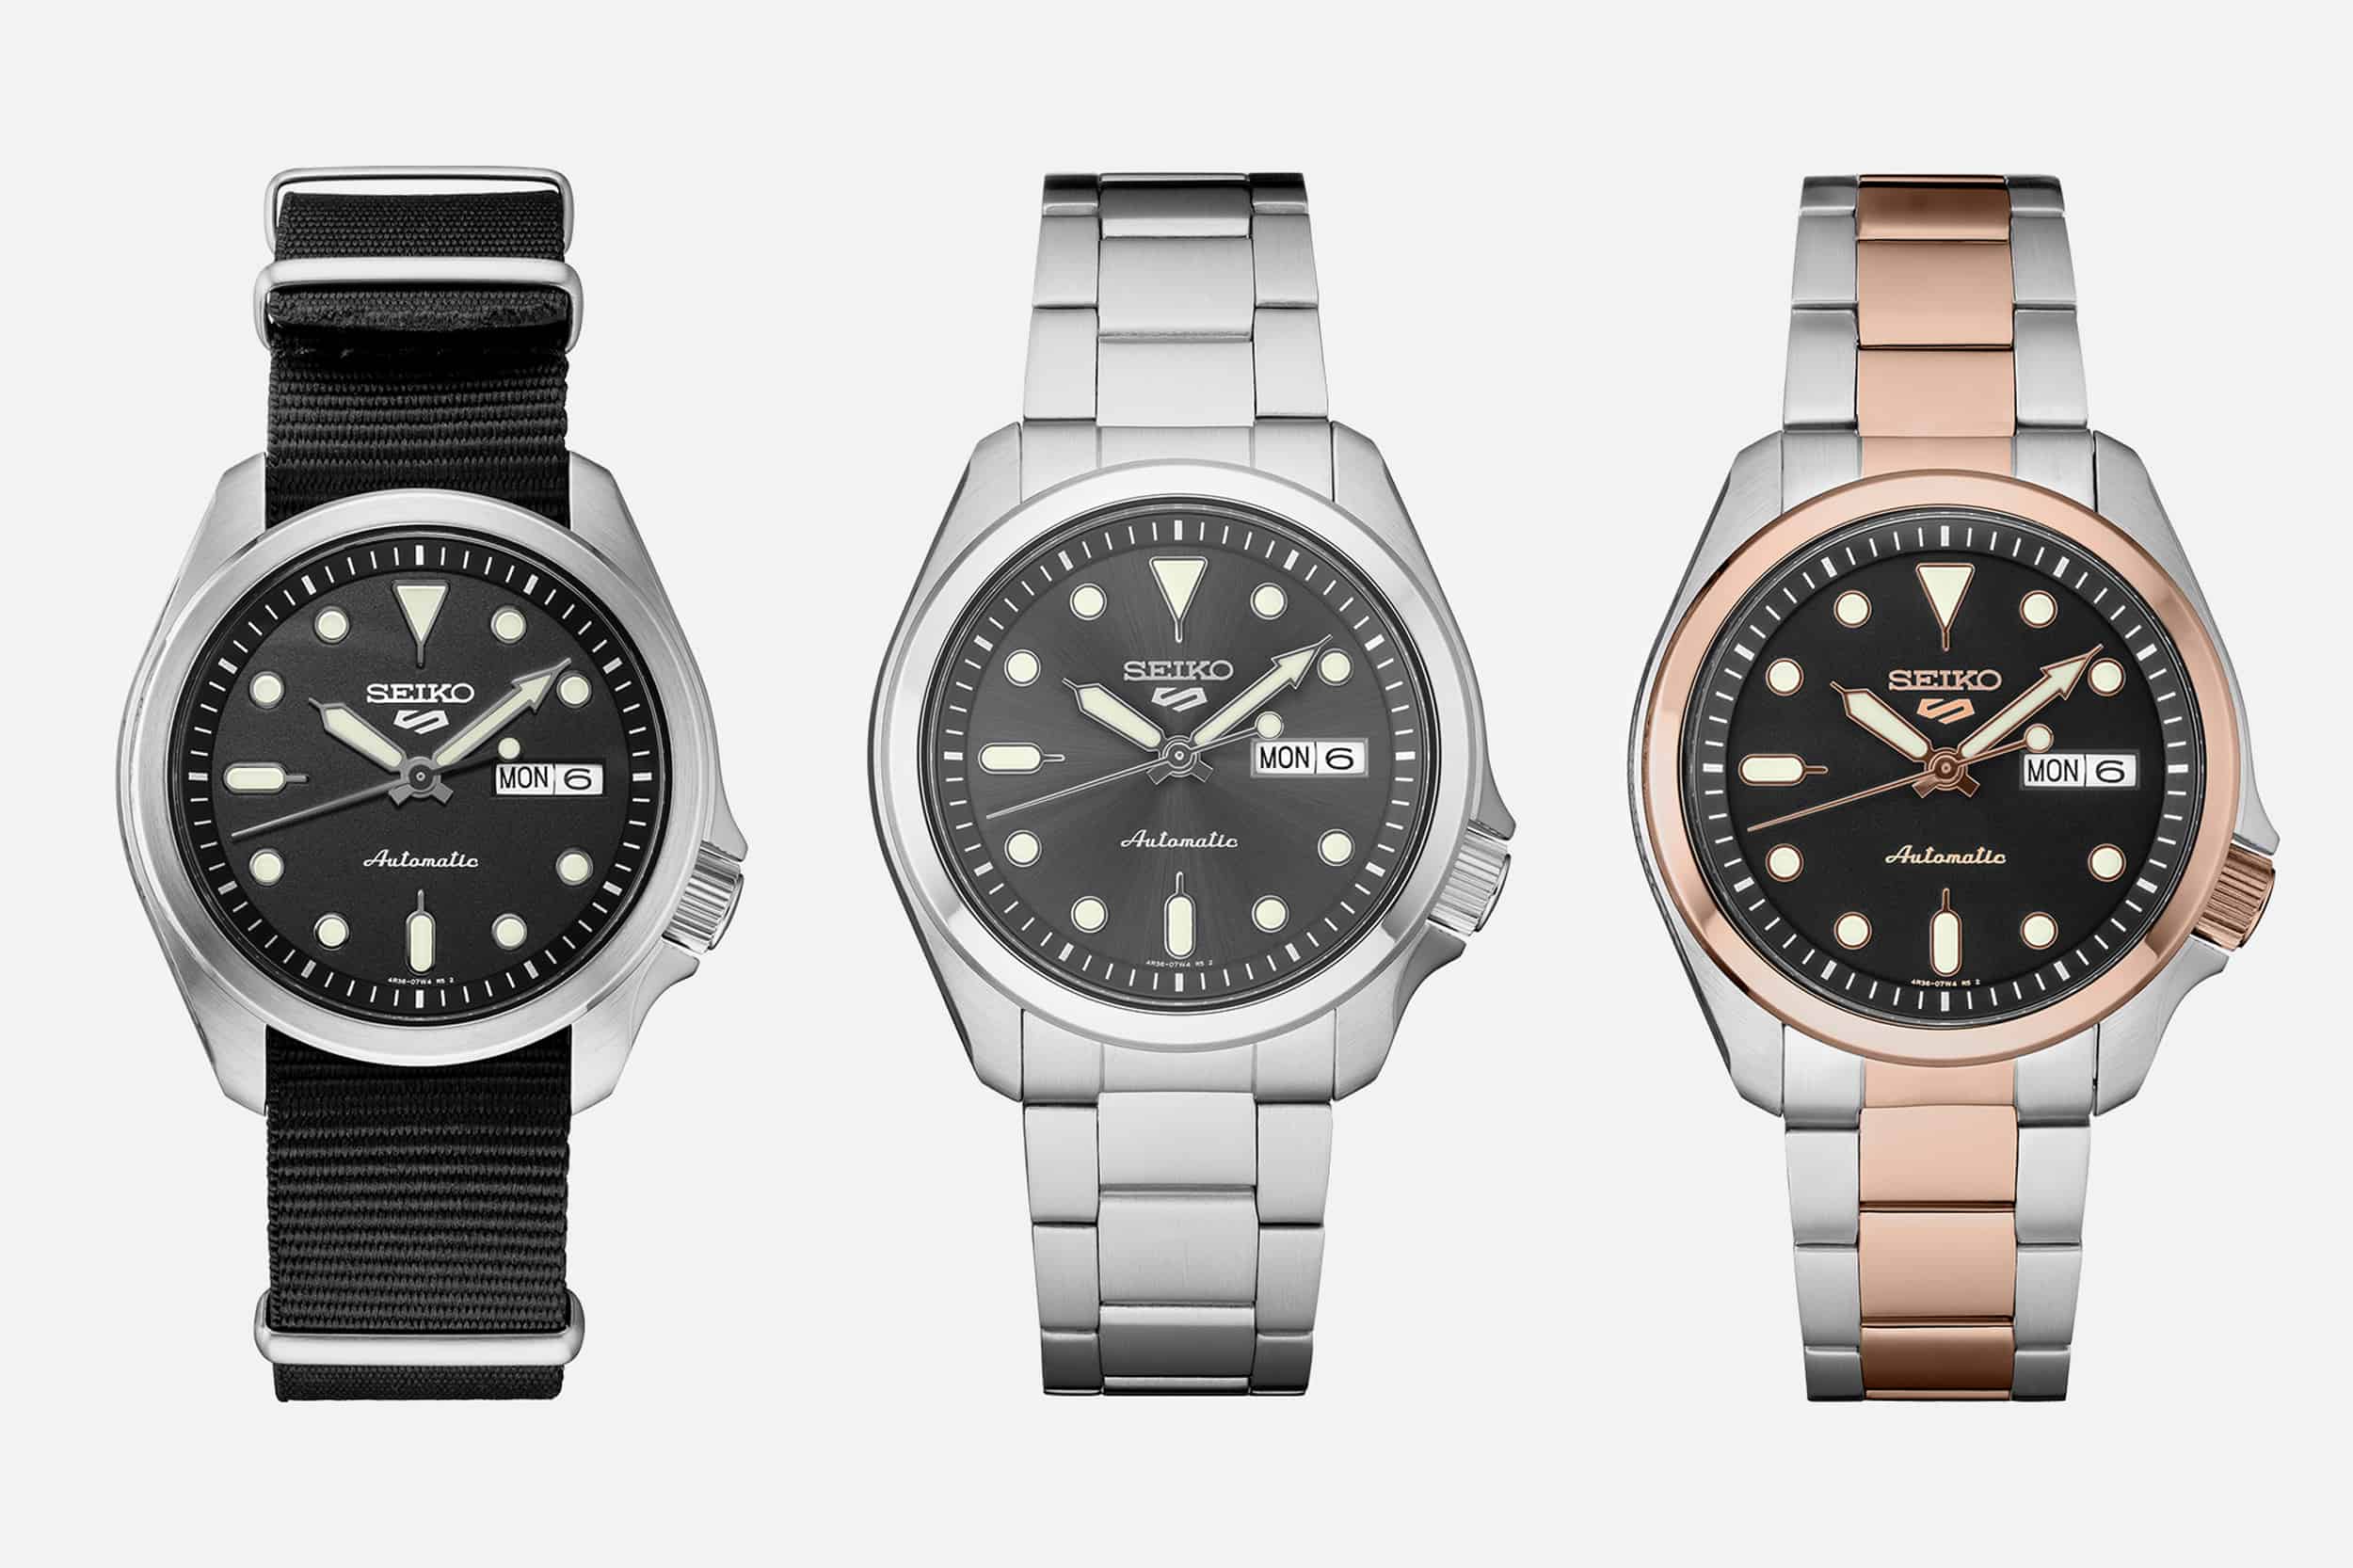 New Watches in the Seiko 5 Sports 